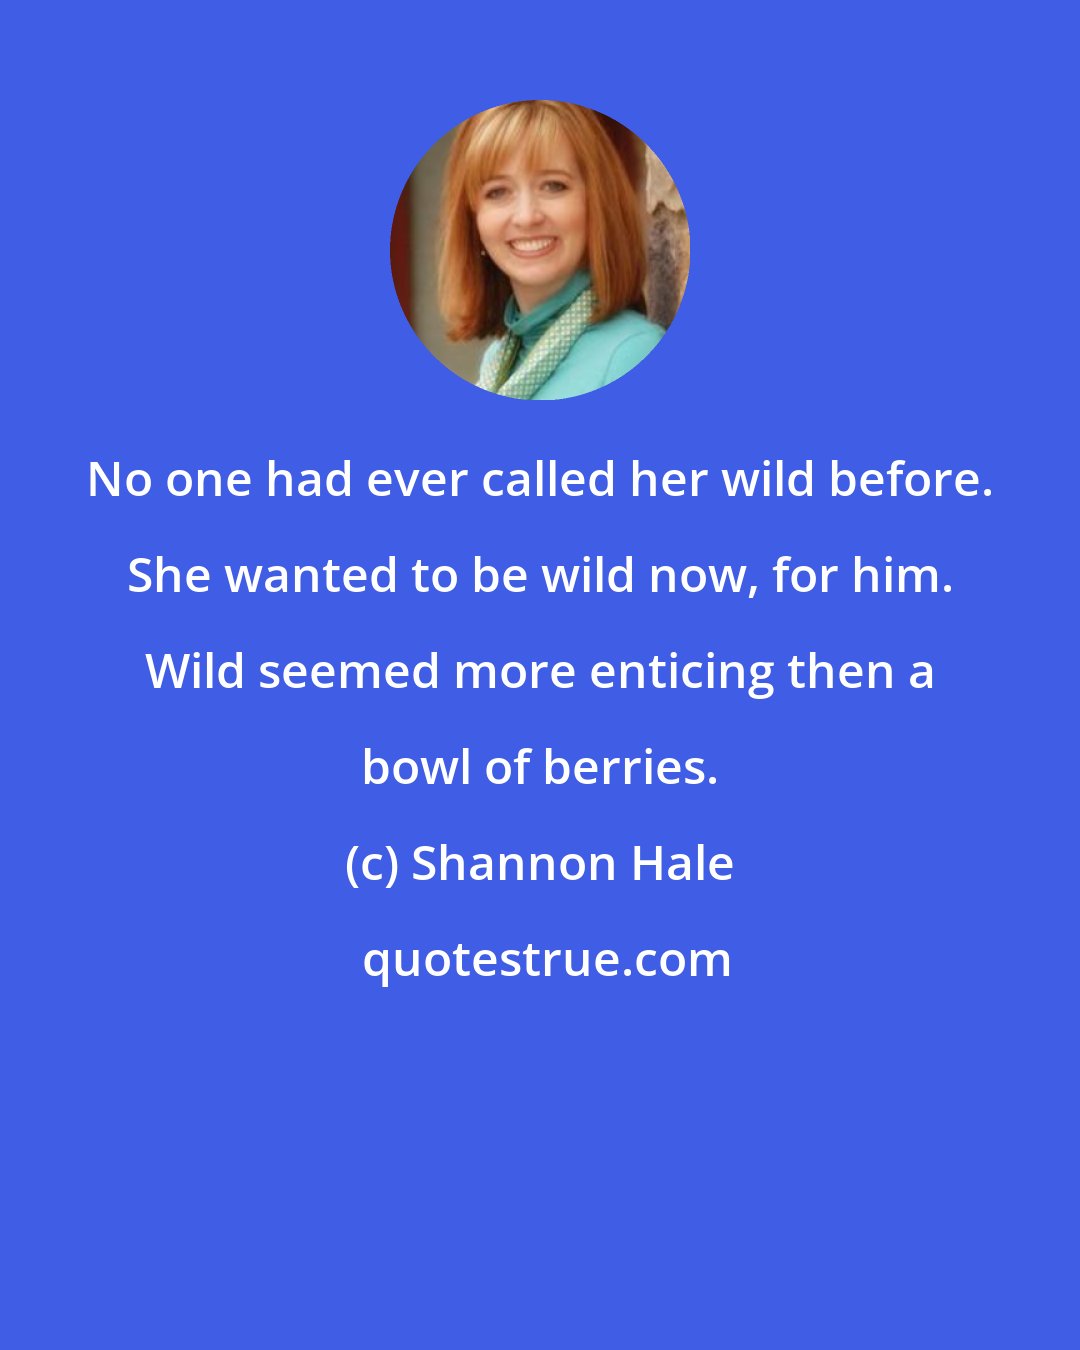 Shannon Hale: No one had ever called her wild before. She wanted to be wild now, for him. Wild seemed more enticing then a bowl of berries.